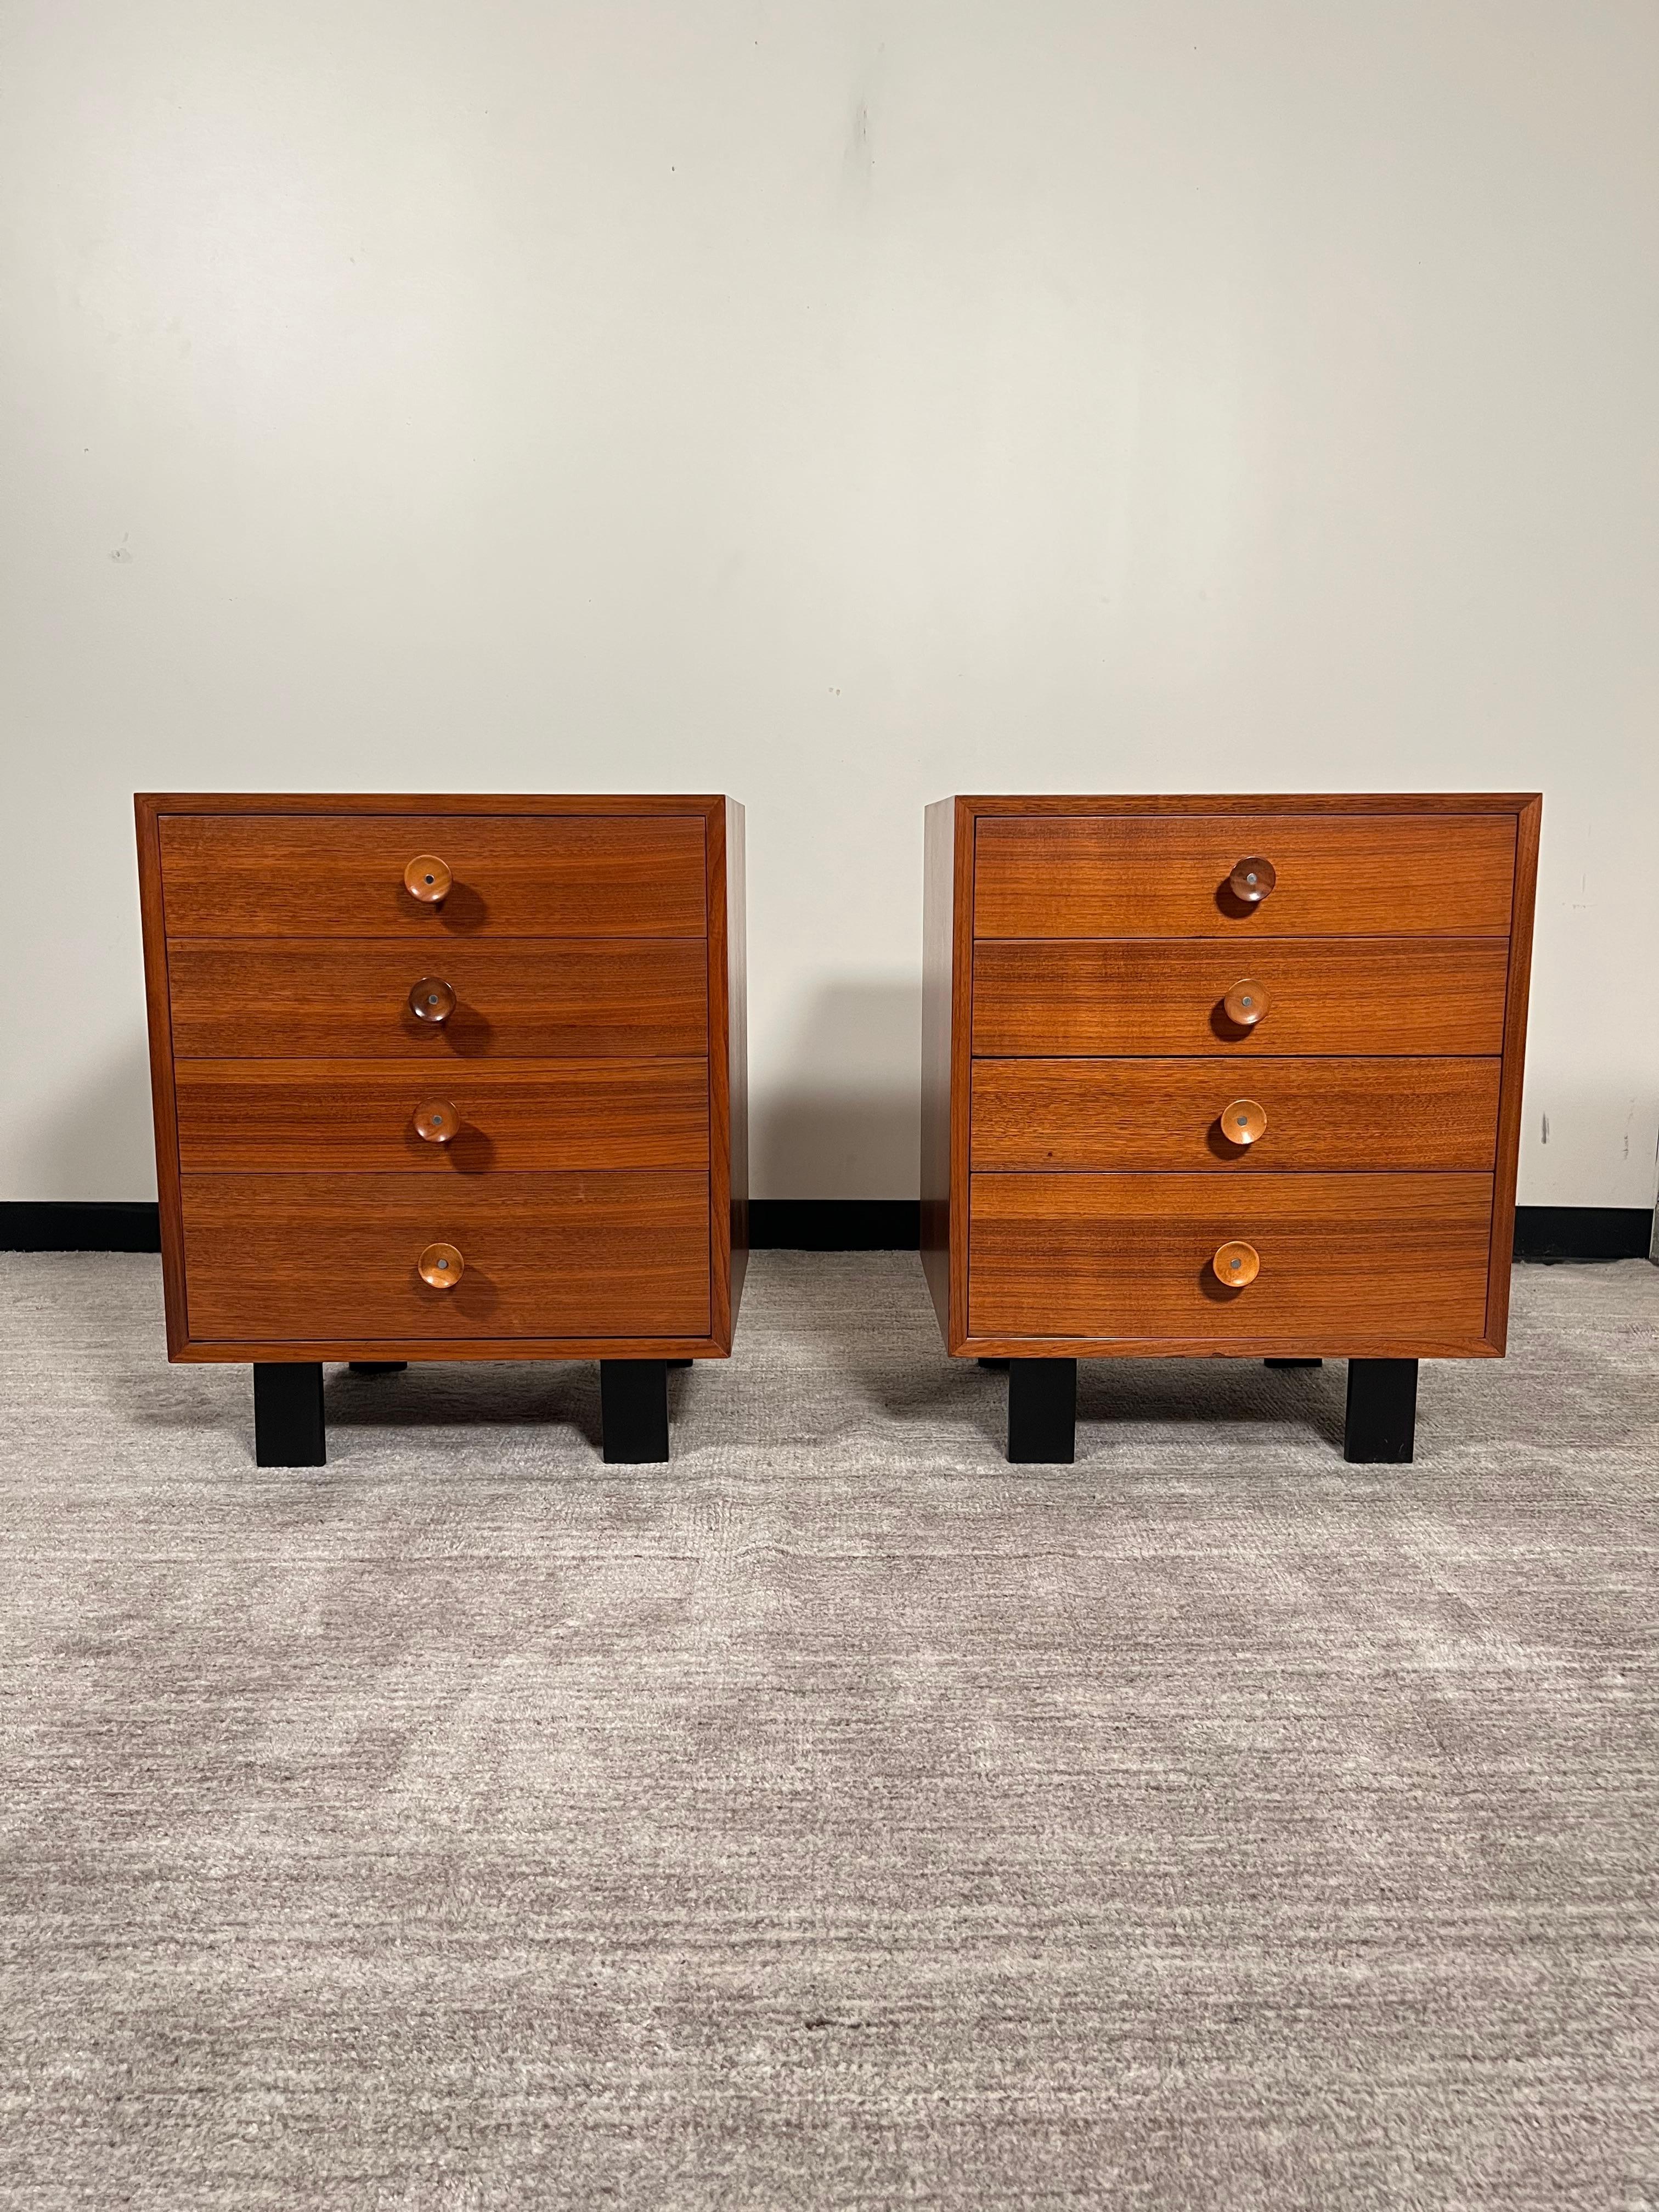 This fantastic pair of nightstands were designed by George Nelson for Herman Miller, part of the 'Basic Cabinet Series' and also called 'Primavera', these chests of drawers are signed with 1950's Herman Miller foil labels. Newly refinished, these